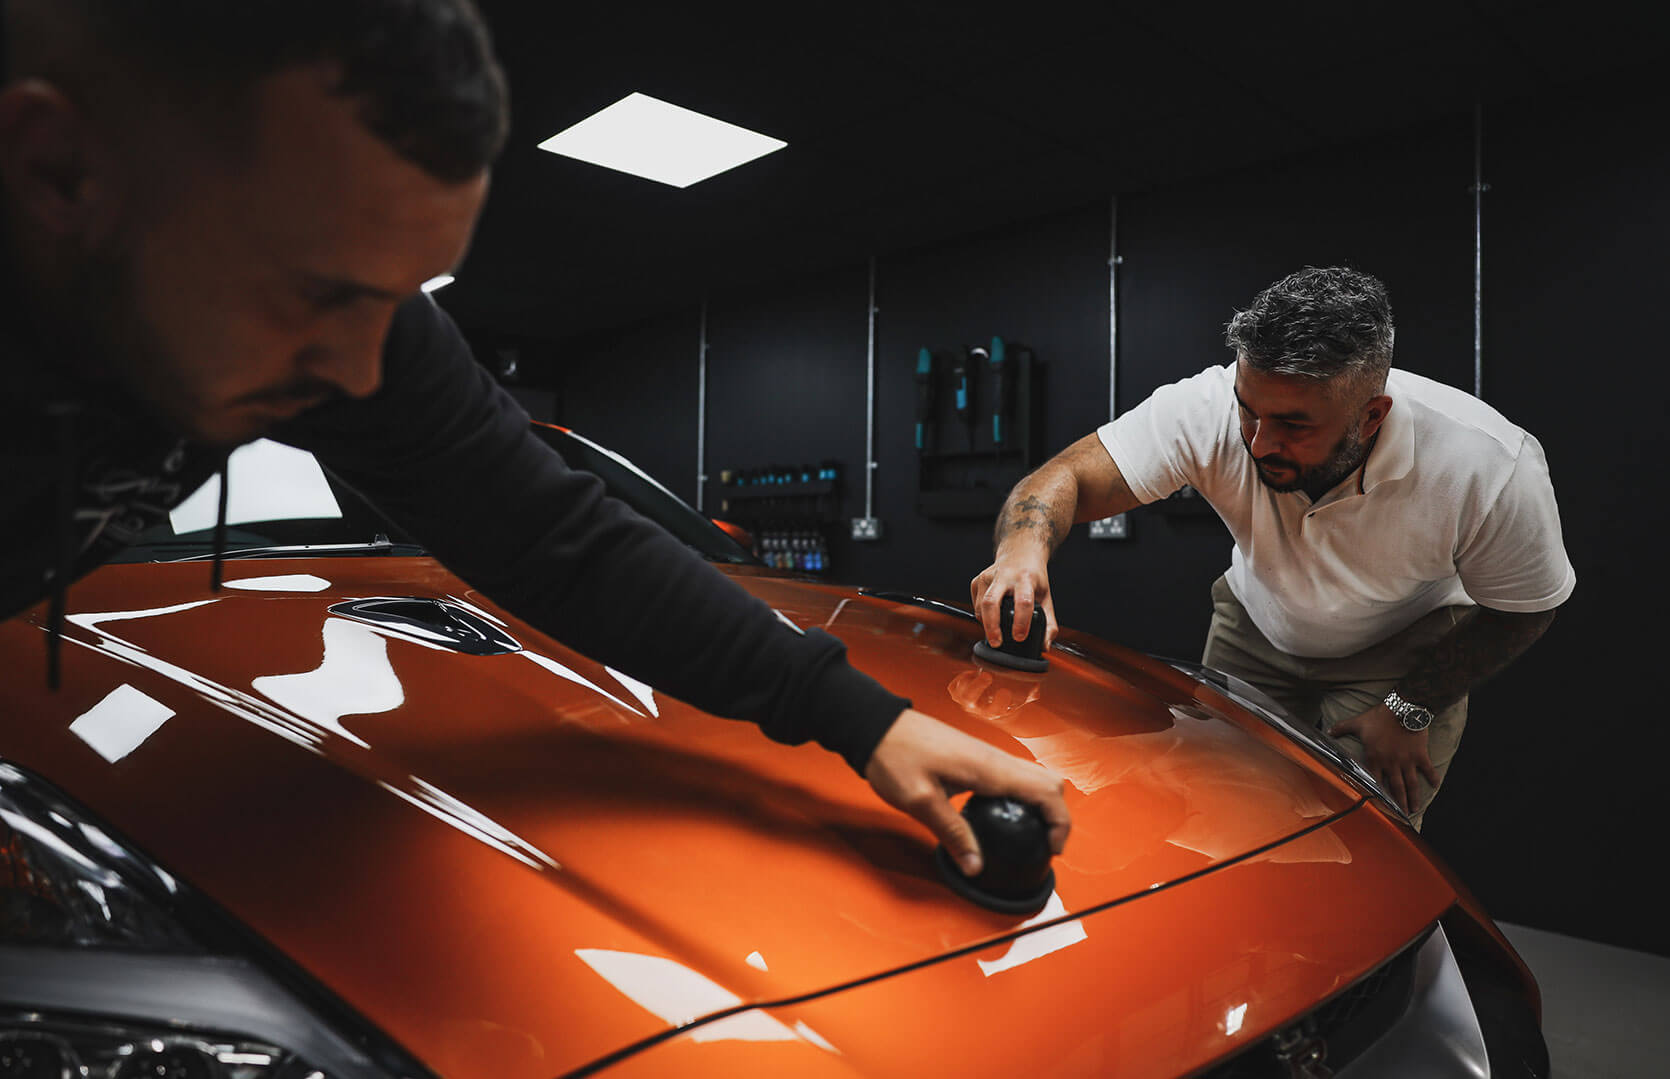 Auto Finesse | The Detailing Academy Serving The needs of the Enthusiast &amp; Pro Detailer Alike